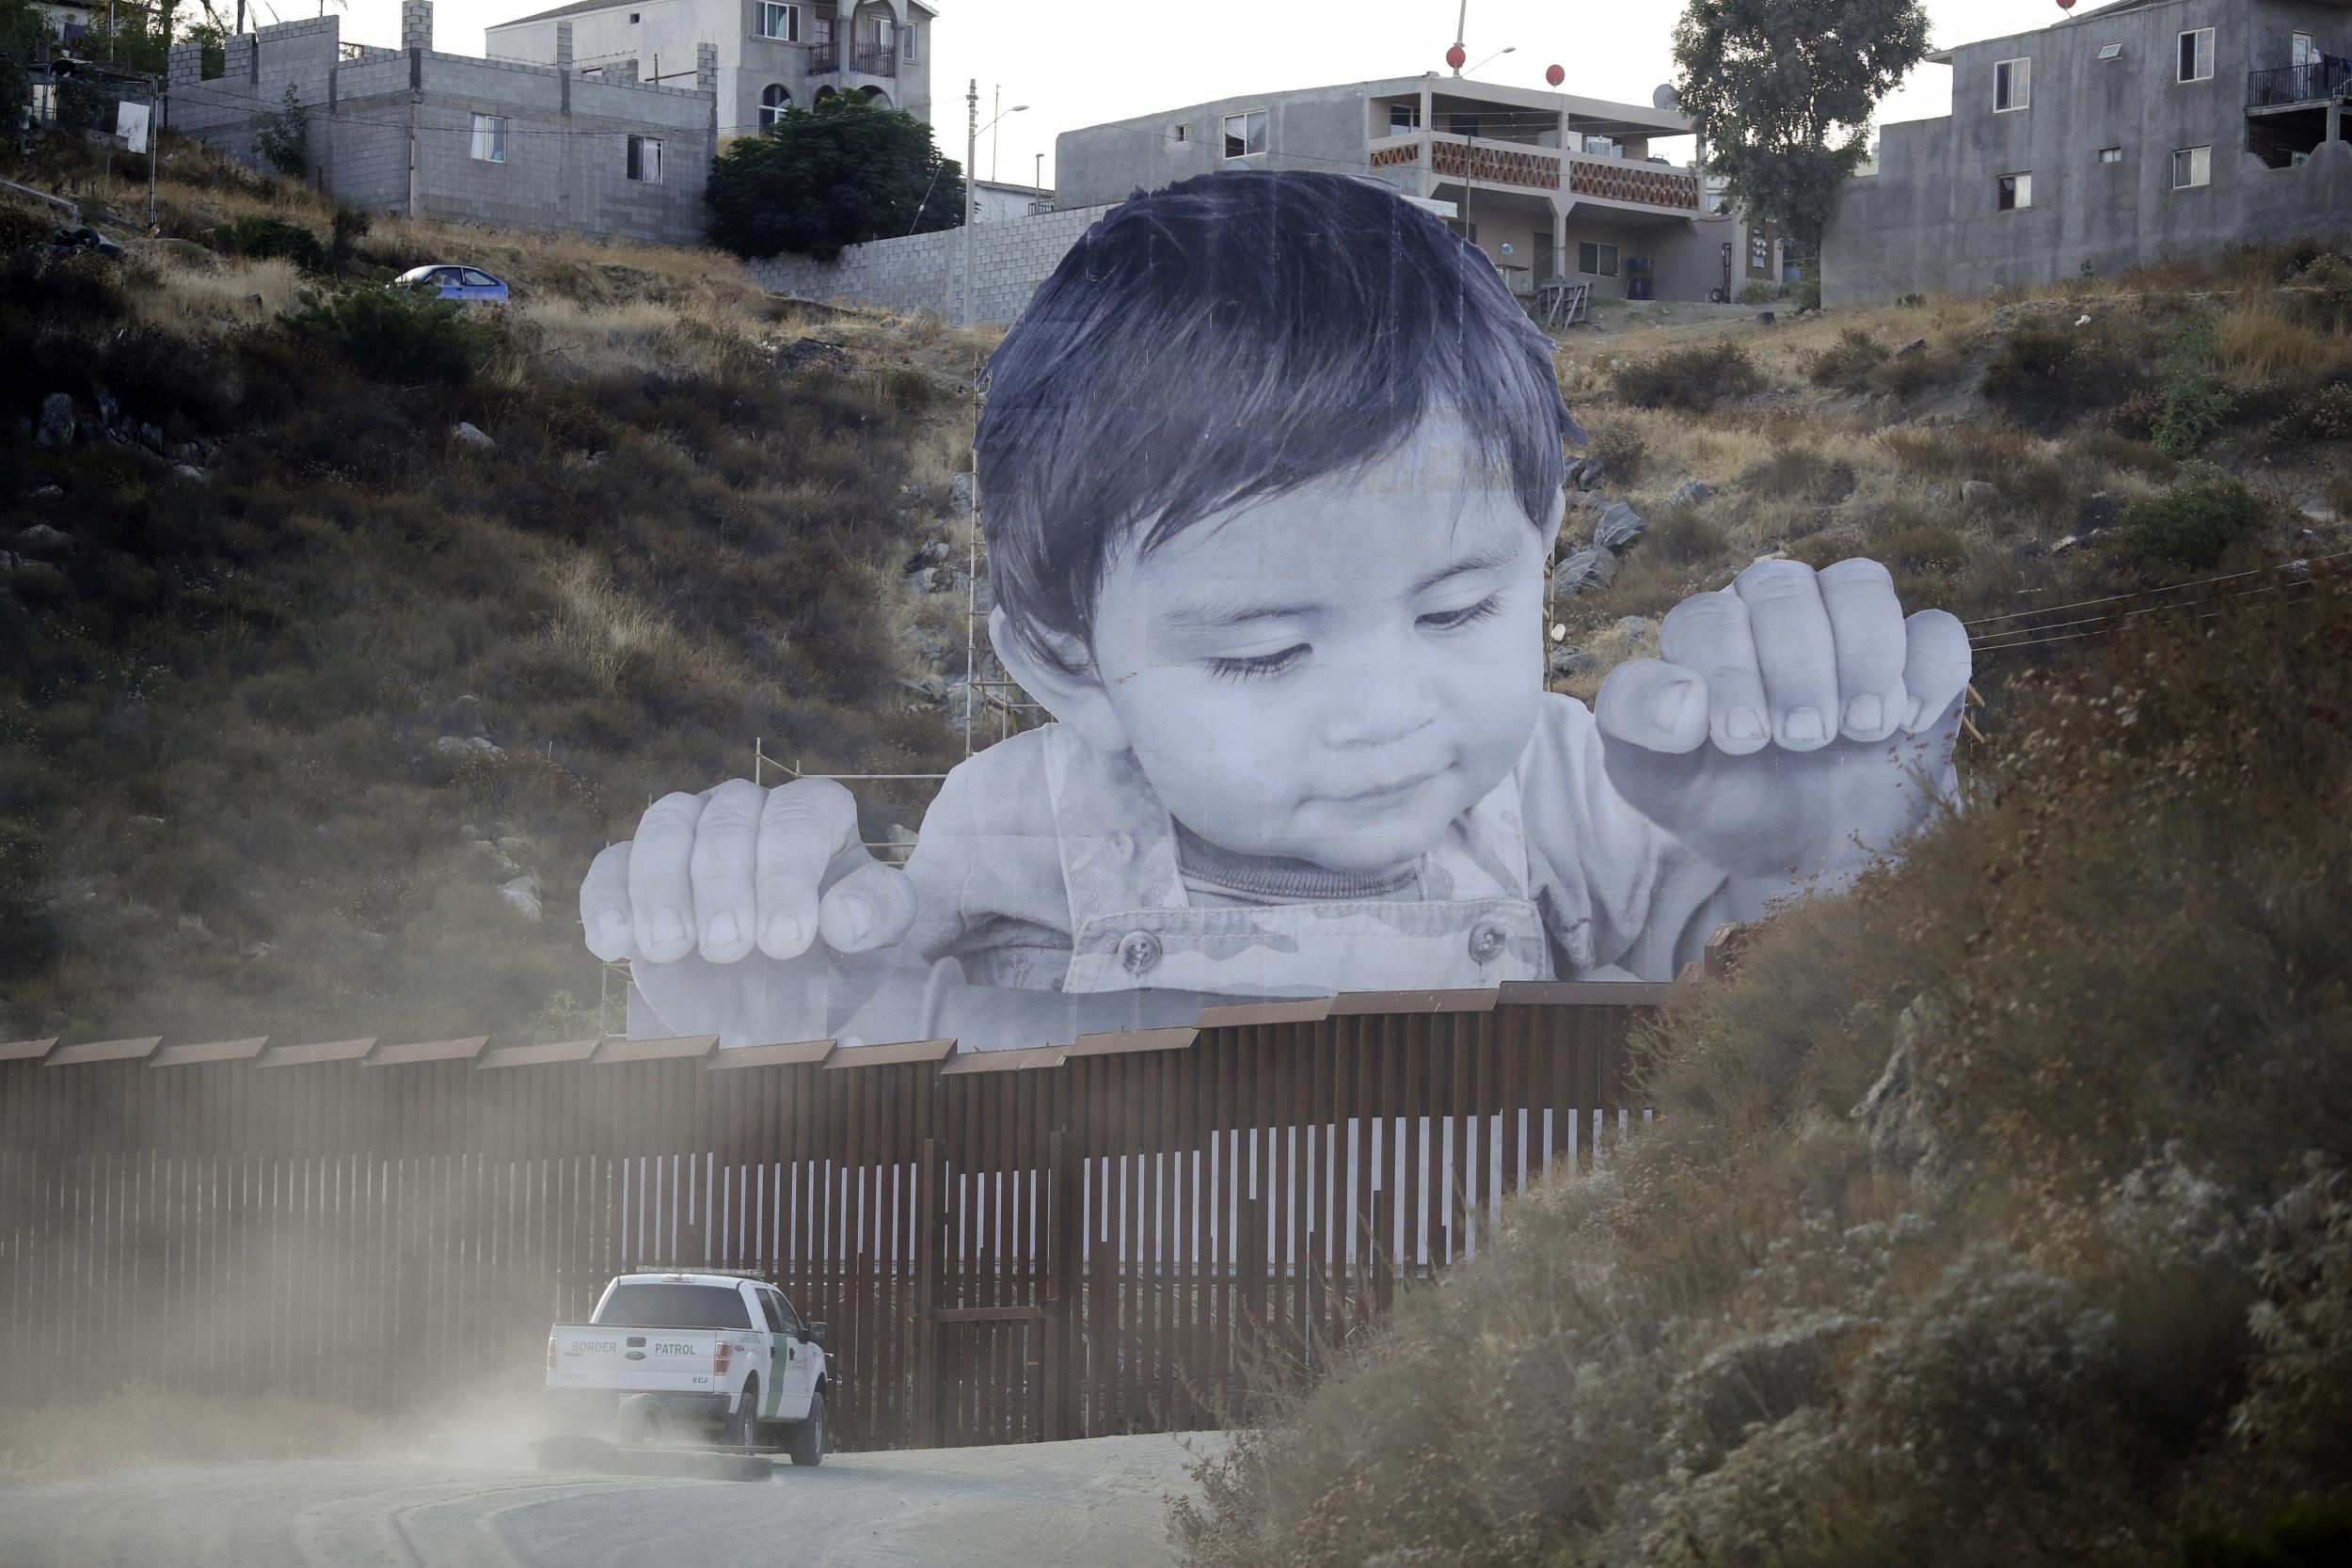 Artist JR, whose artwork comes as Trump scrapped Daca, hopes his image will spark immigration conversations